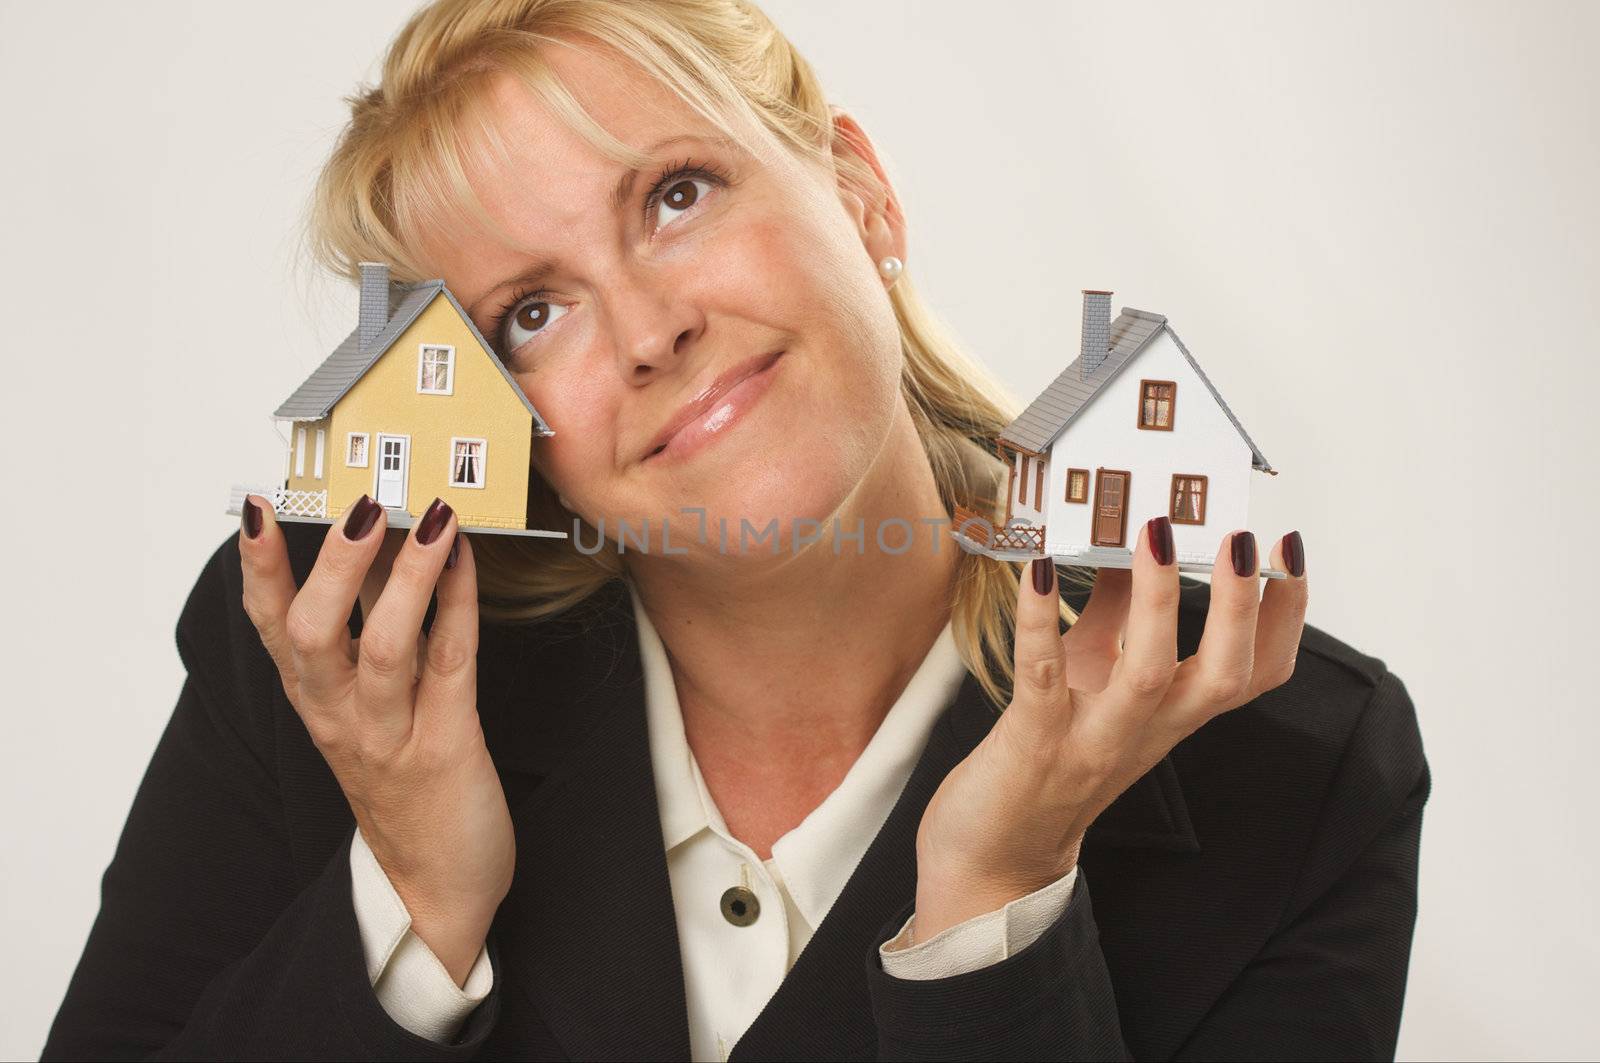 Female dreaming while holding two houses.